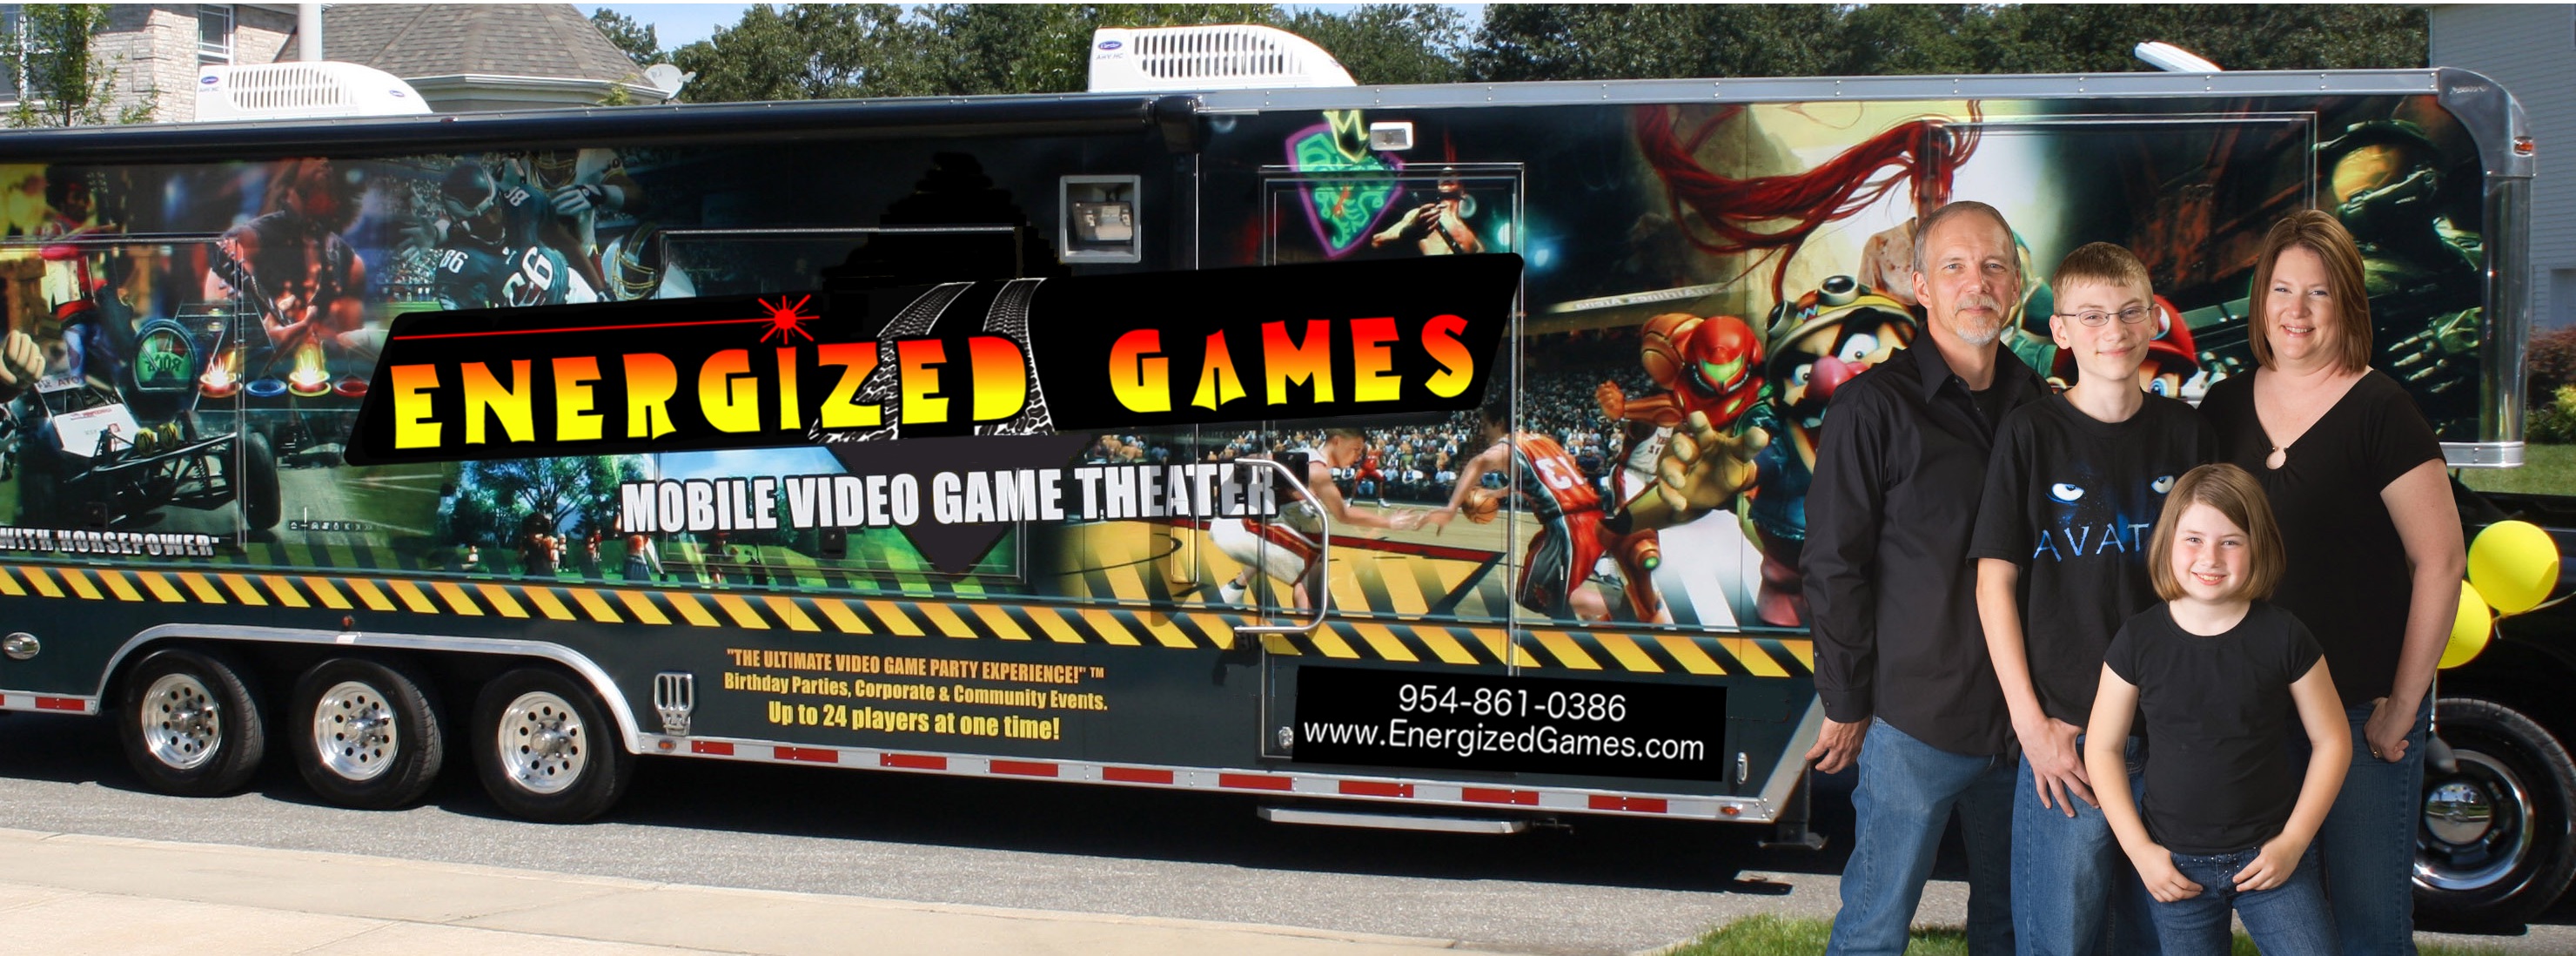 Energized Games Theater